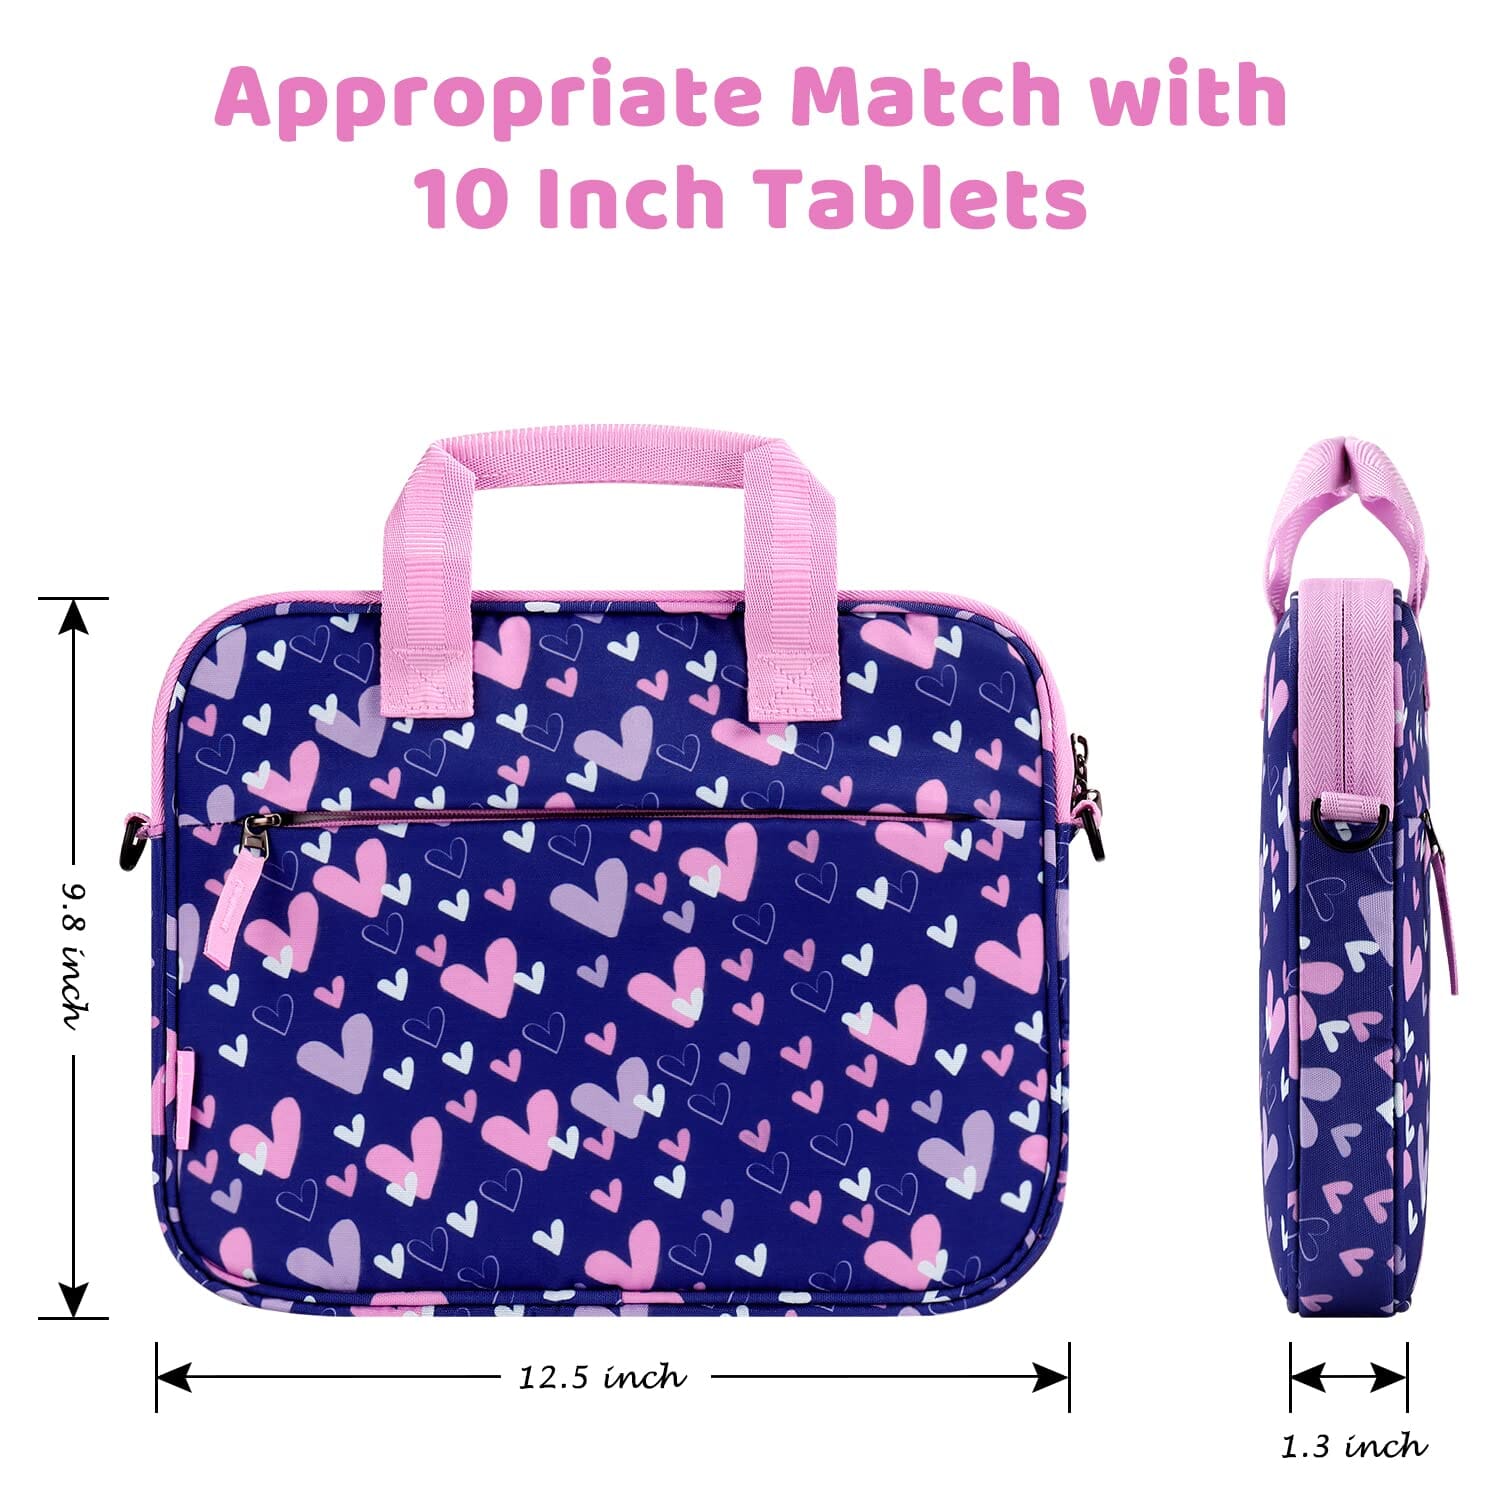 Choco Mocha 12.5 Inch Kids Tablet Sleeve Bag for Girls, Kids Tablet Carrying Case for Fire HD 10, Fire 7, Fire HD 8, Fire 10 Tablet, Kindle Kids Edition, Apple iPad, Heart Navy Pink chocomochakids 